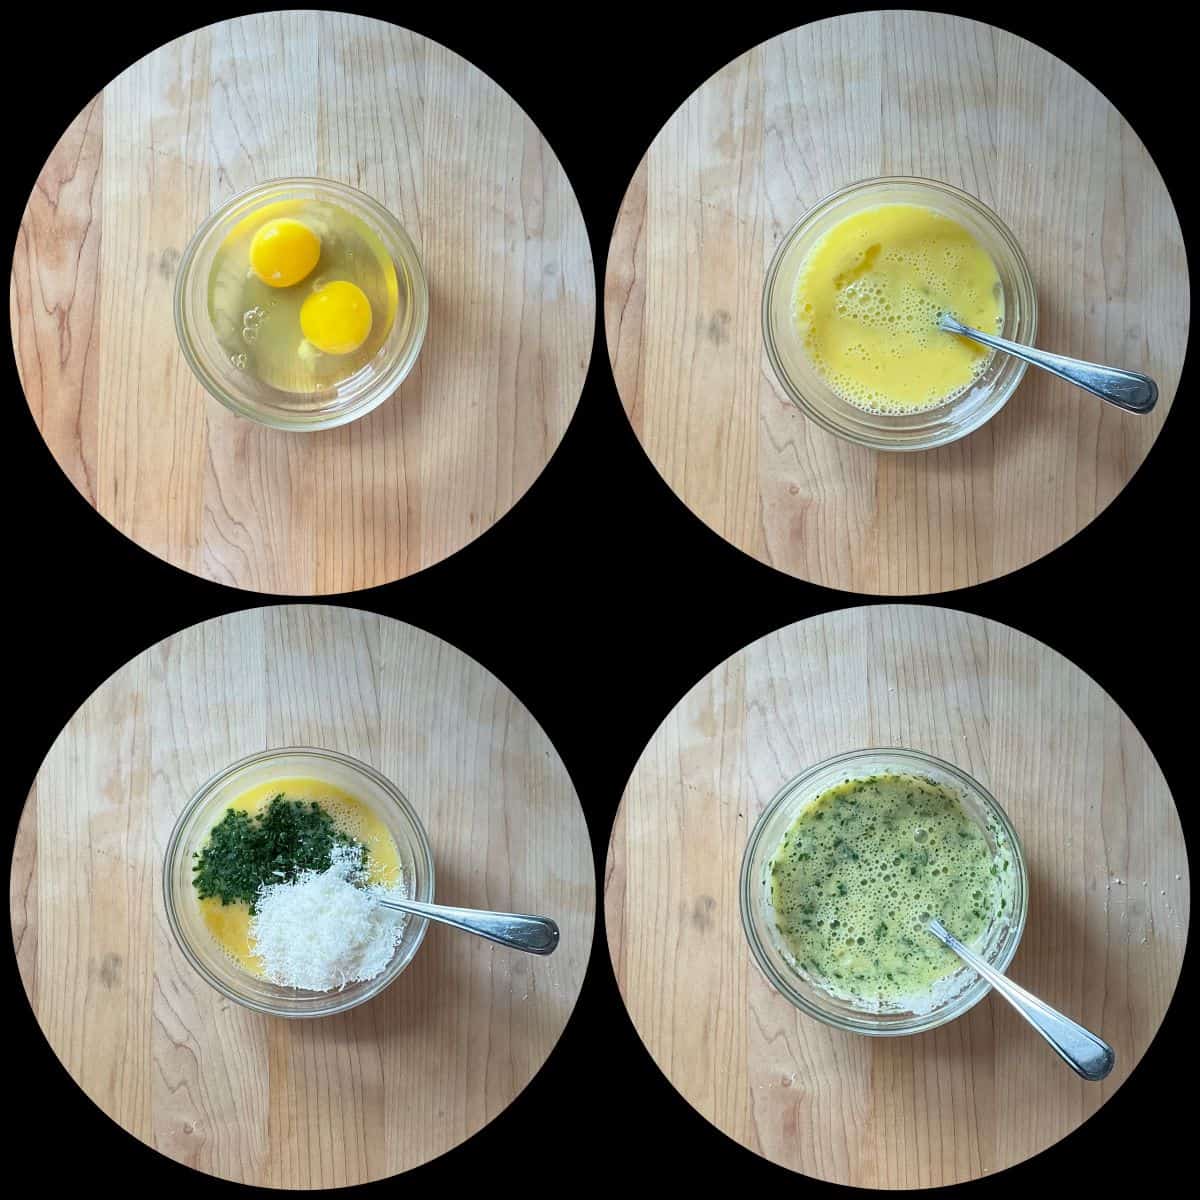 A photo collage of the egg mixture being whisked together.